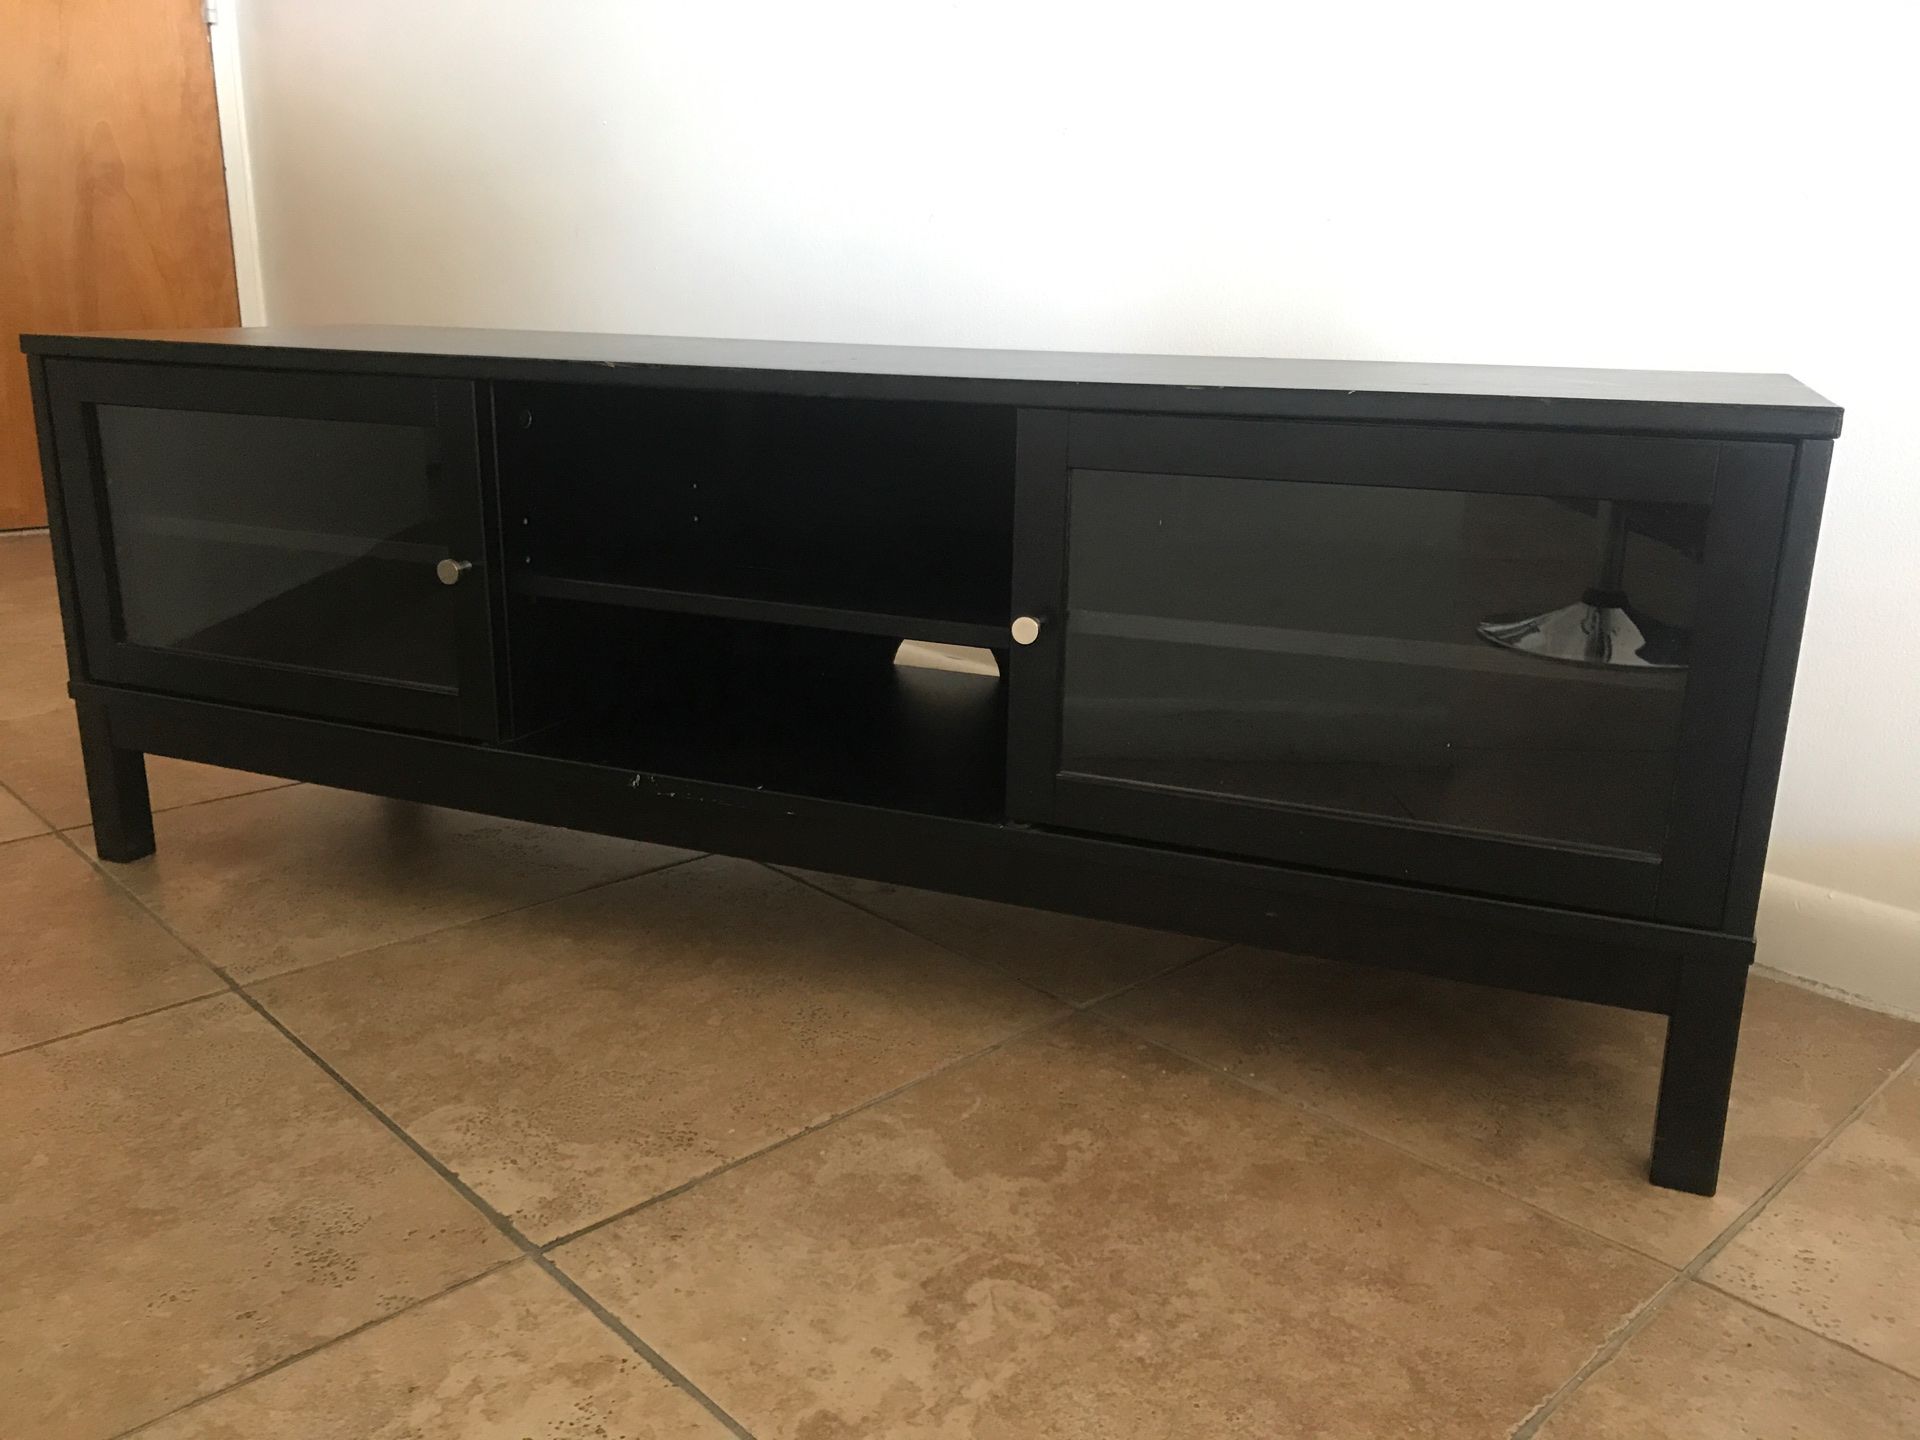 Tv stand with sliding doors